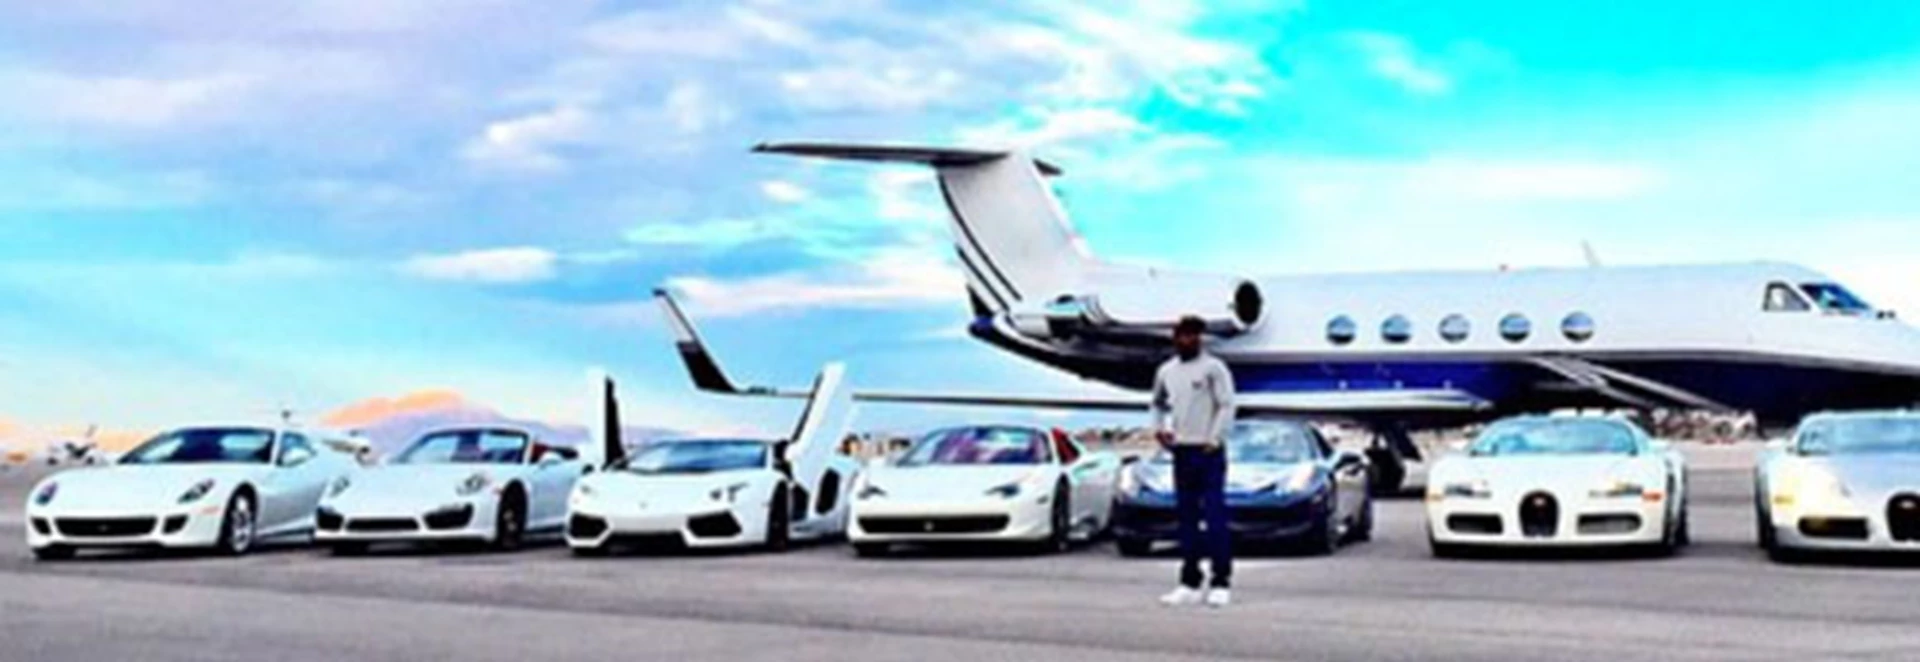 Floyd Mayweather's Car Collection 